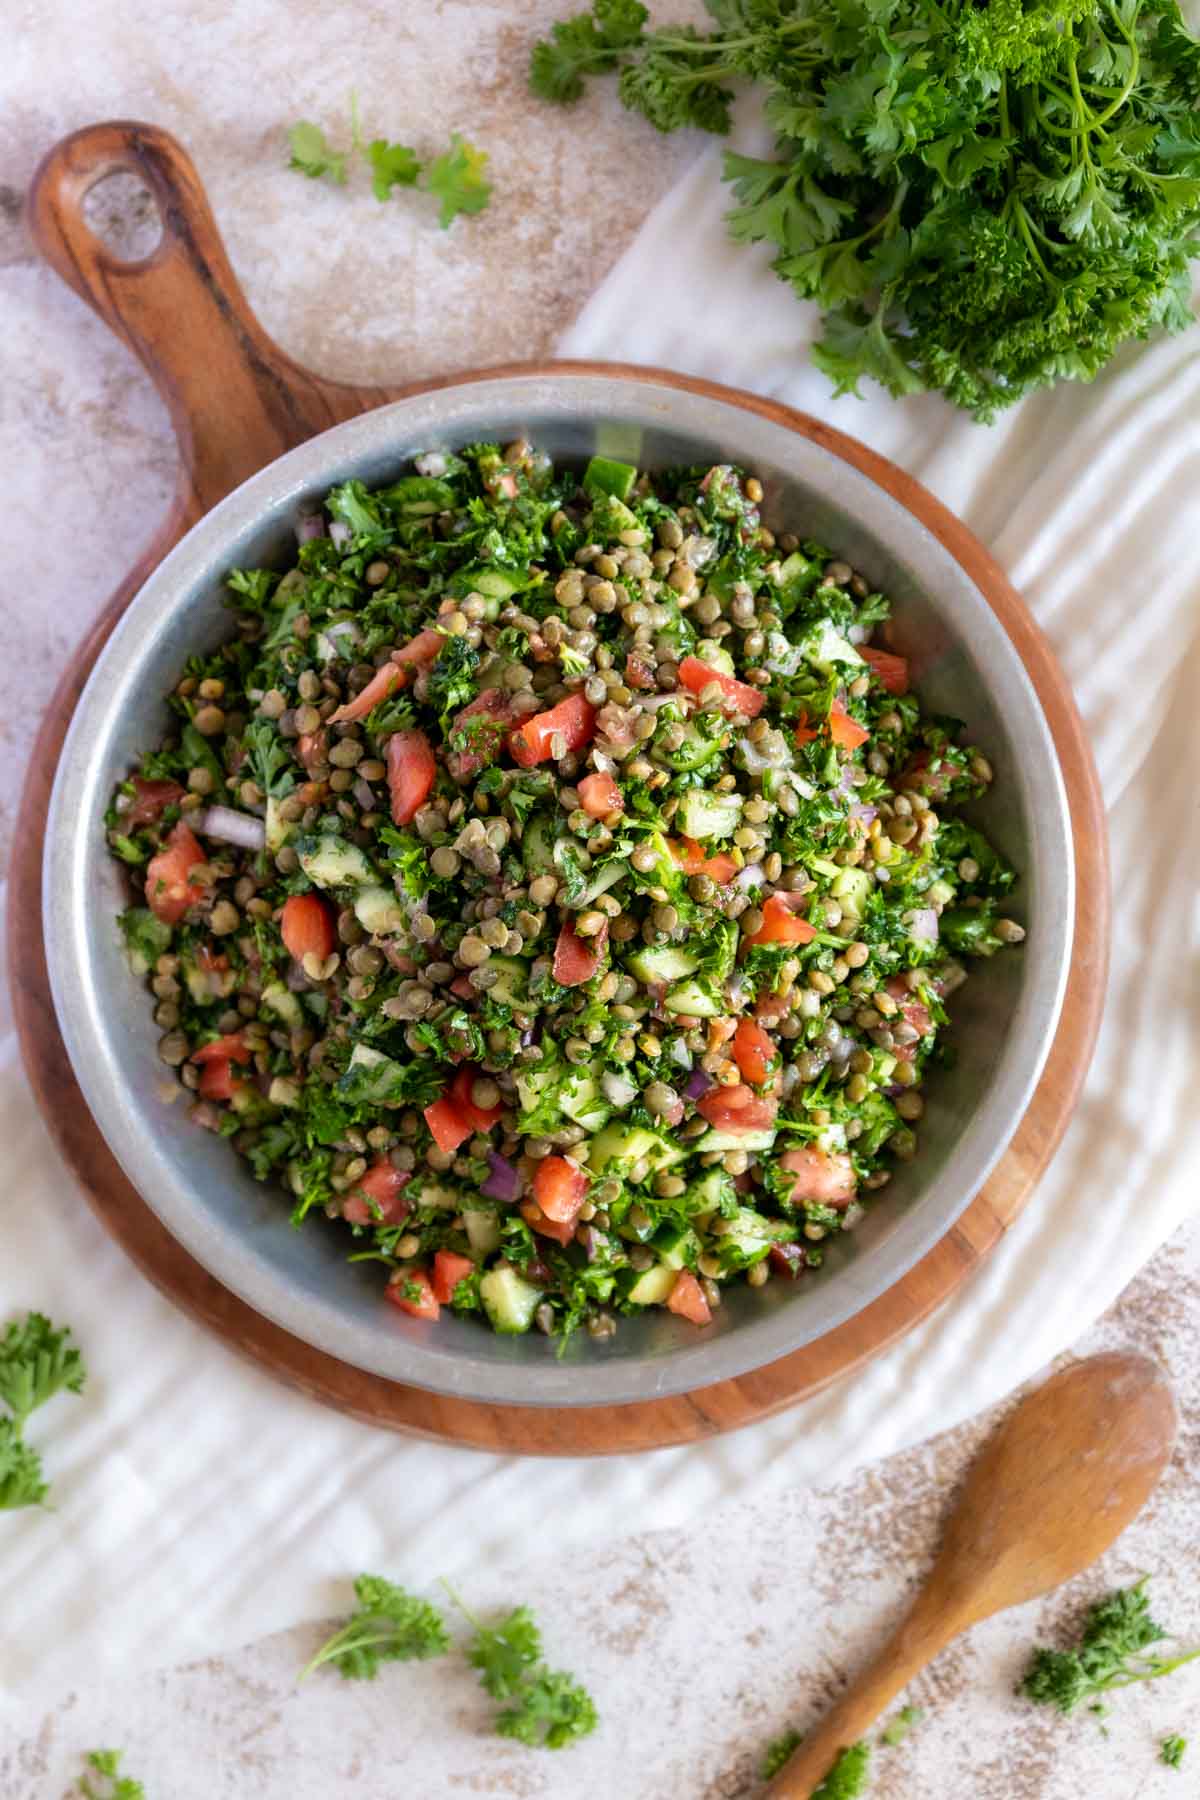 Tabbouleh in a serving dish with a wooden spoon and parsley leaves.